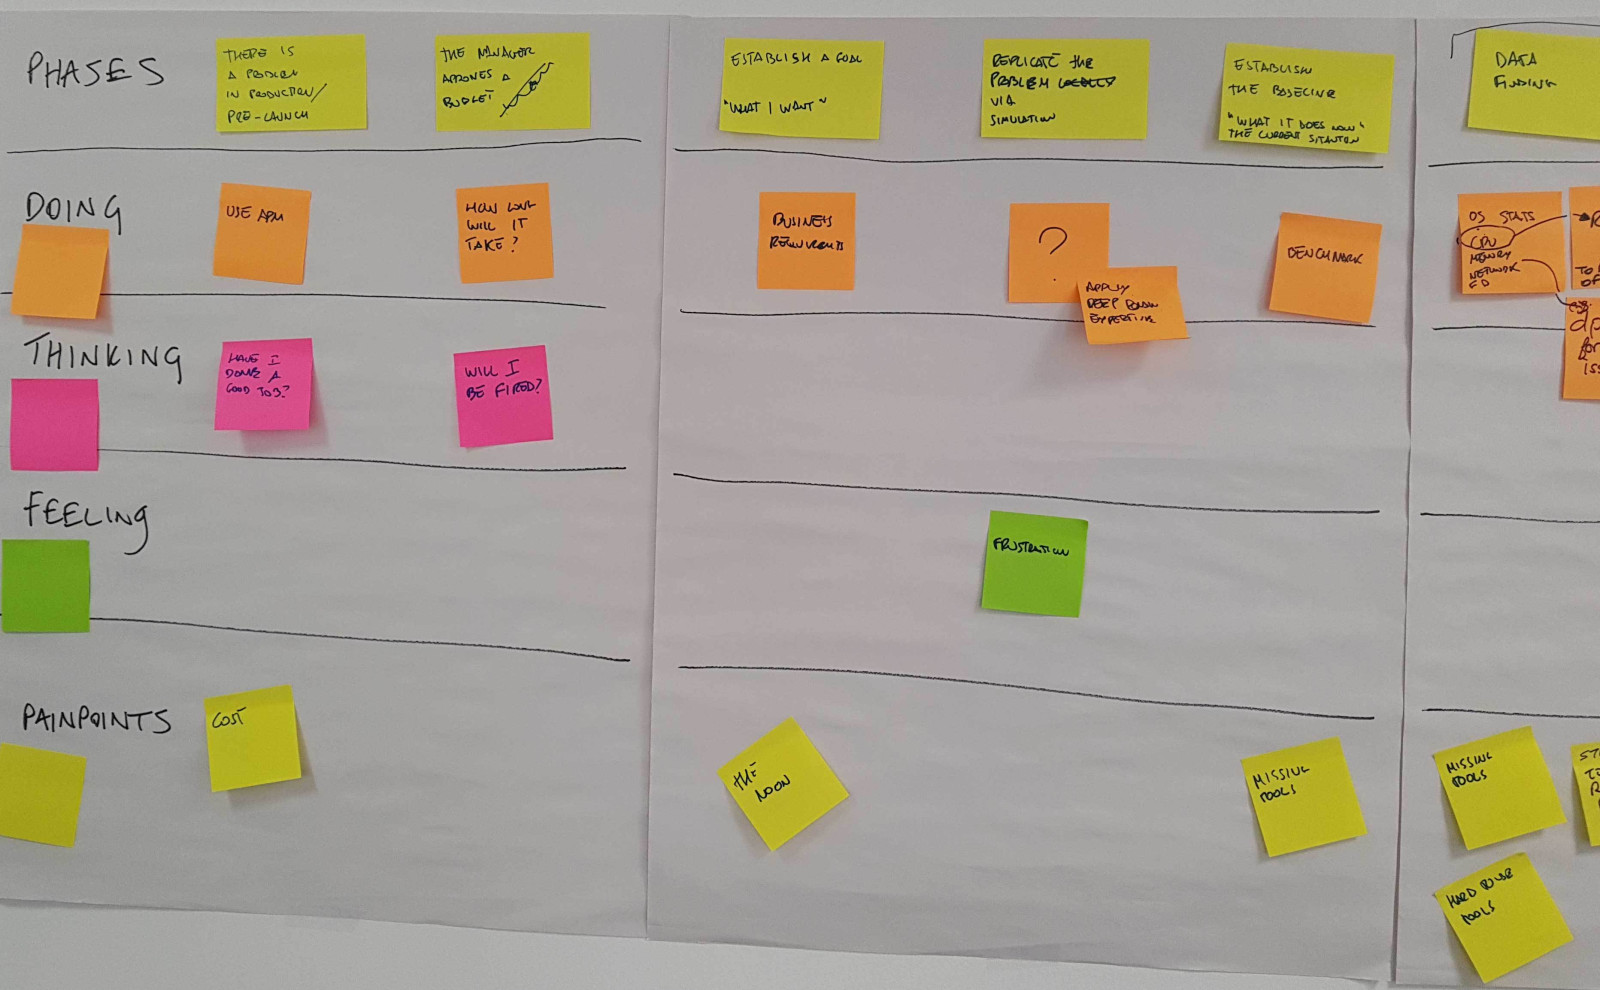 photo of a whiteboard with design sprint as-is user journey map illustrating Alex